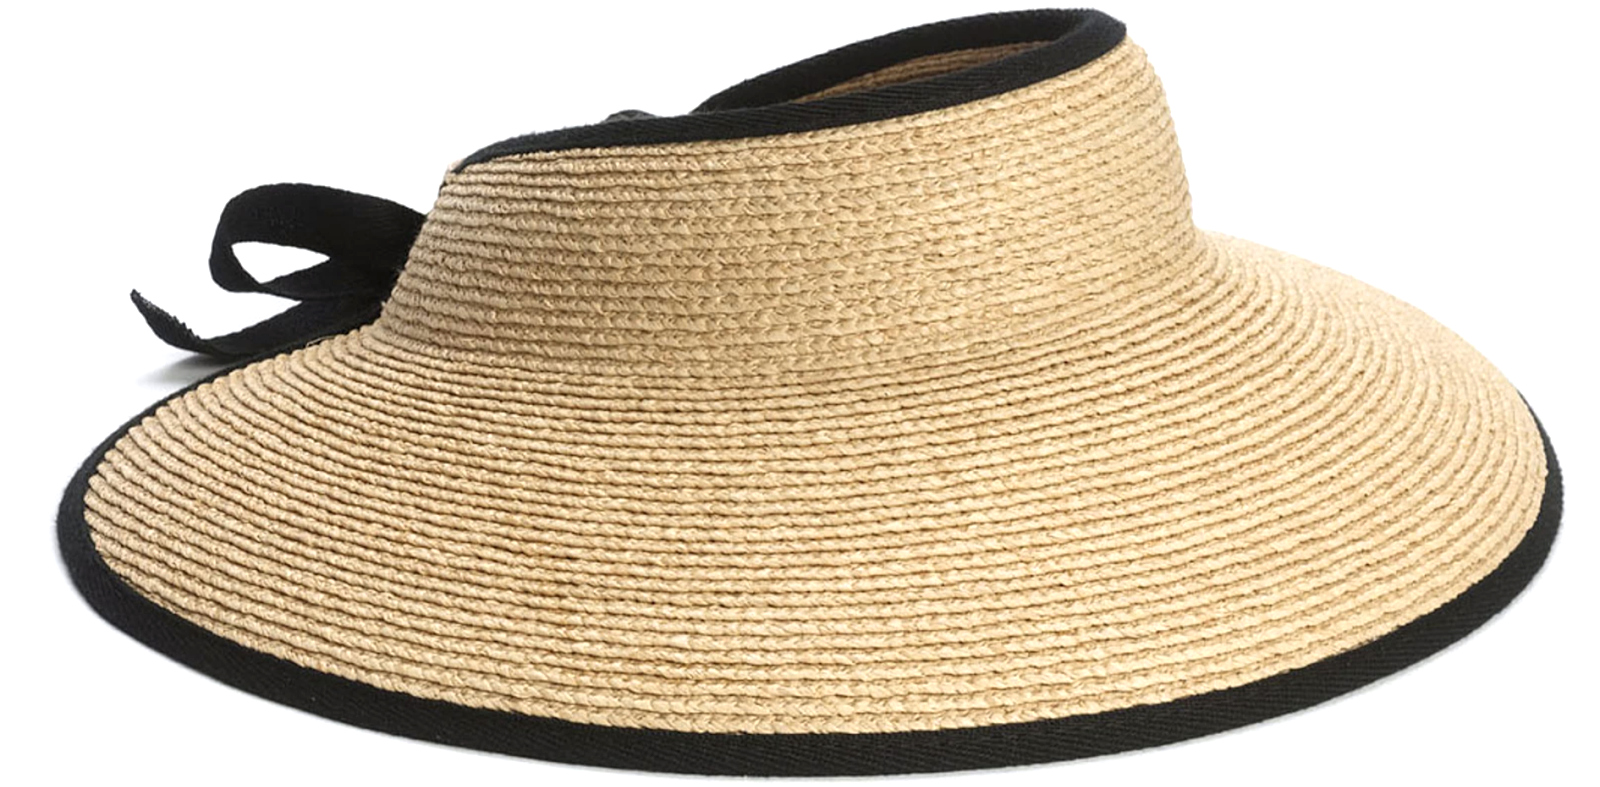 GXF Spring and Summer New Ladies Straw hat White top hat Sun hat Travel Sun hat Photo hat Color : Black 